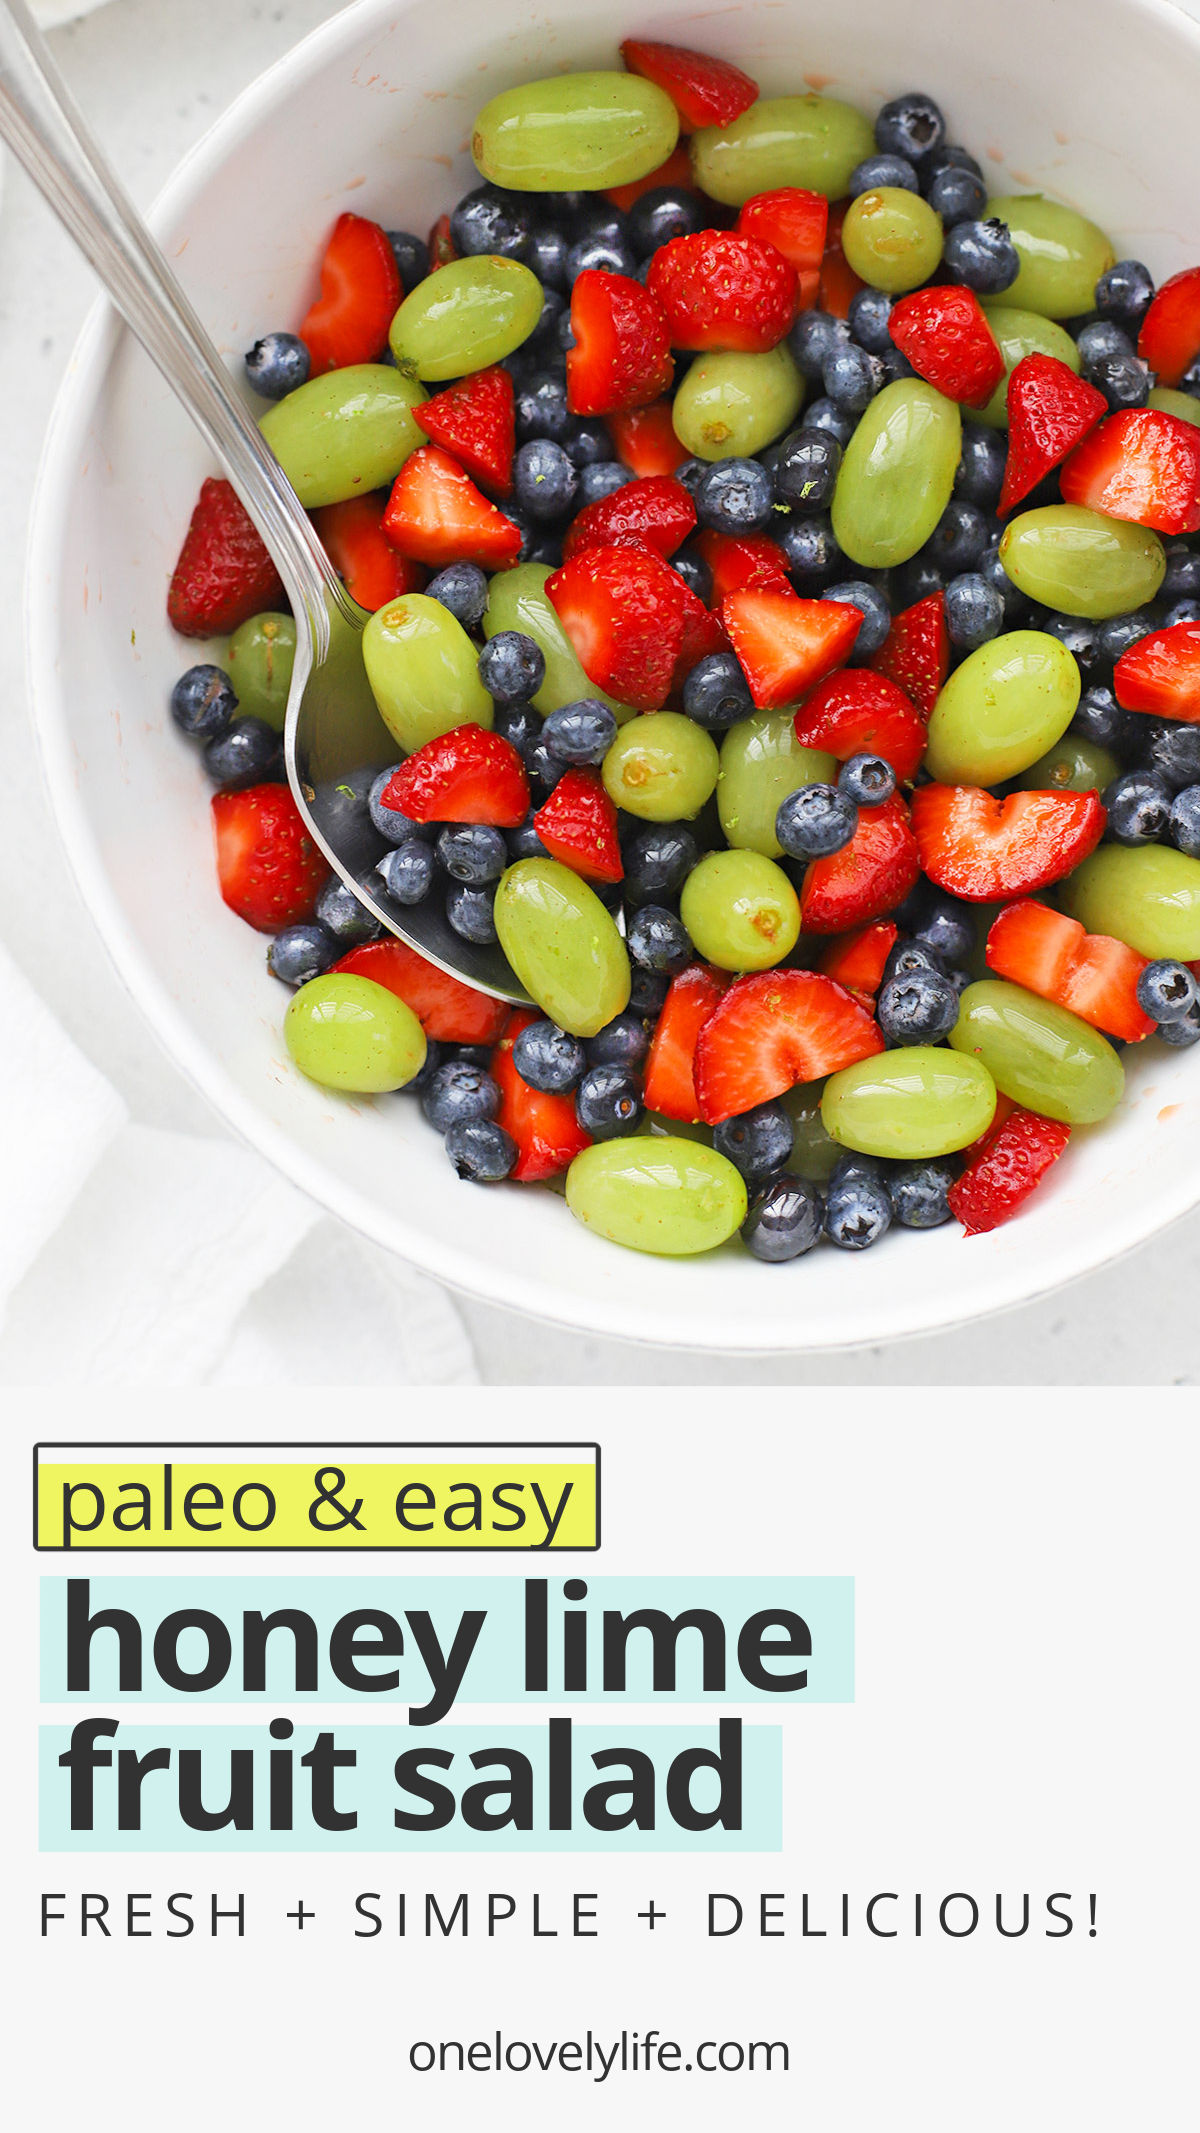 Honey Lime Fruit Salad is my favorite side dish. It's perfect for weeknight dinners, baby or wedding showers, barbecues, and more! // honey lime fruit salad recipe // healthy fruit salad // paleo fruit salad // fruit salad recipe // honey lime dressing